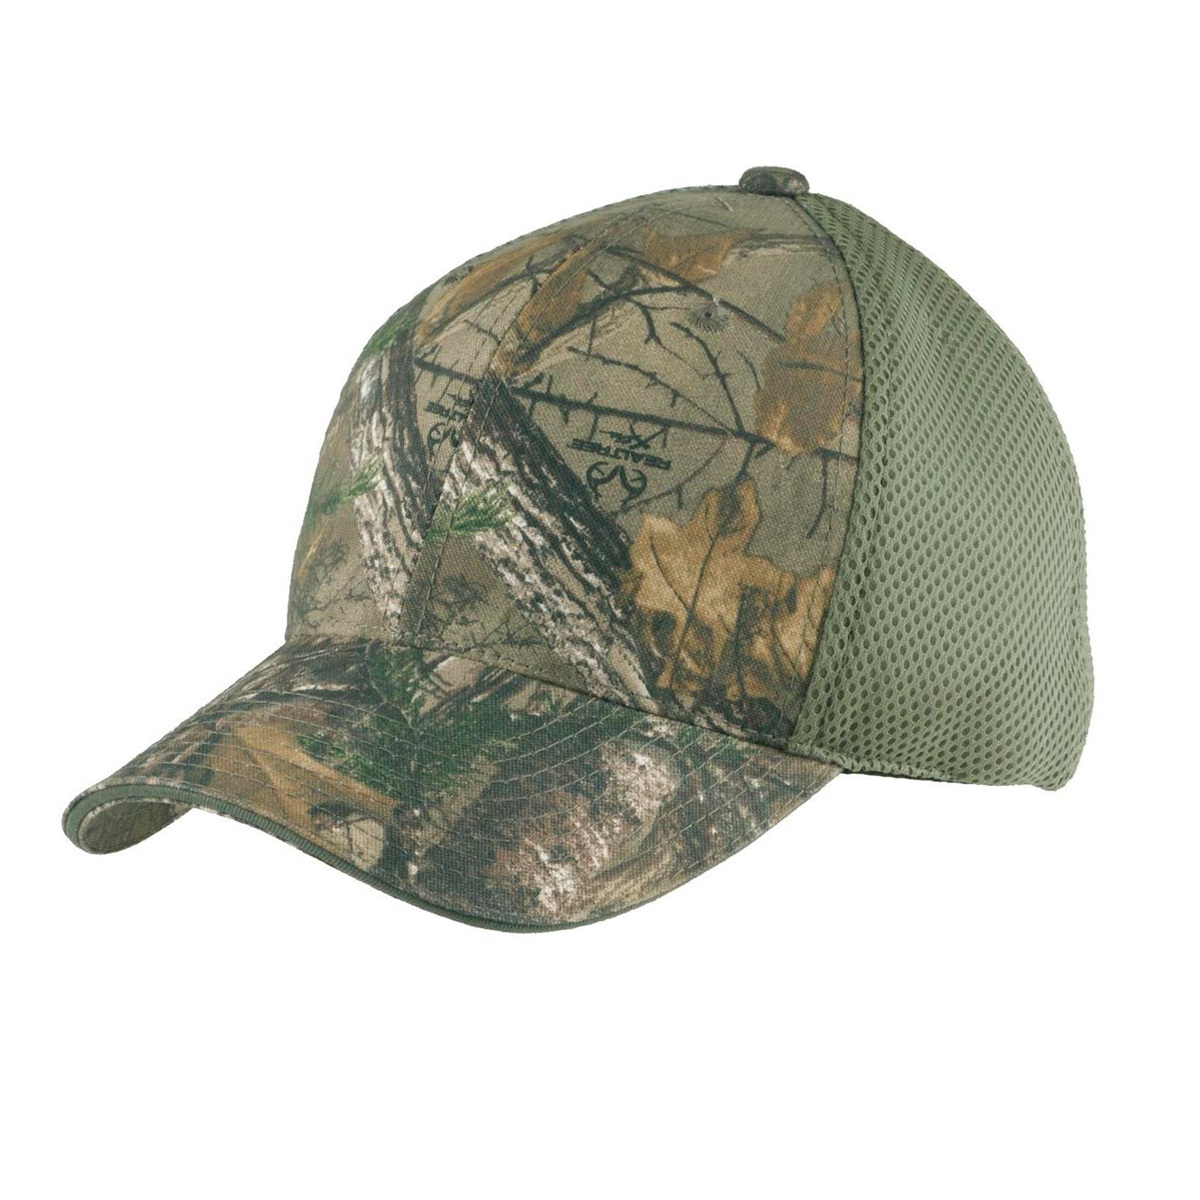 Port Authority C912 Camouflage Cap with Air Mesh Back - Realtree Xtra ...